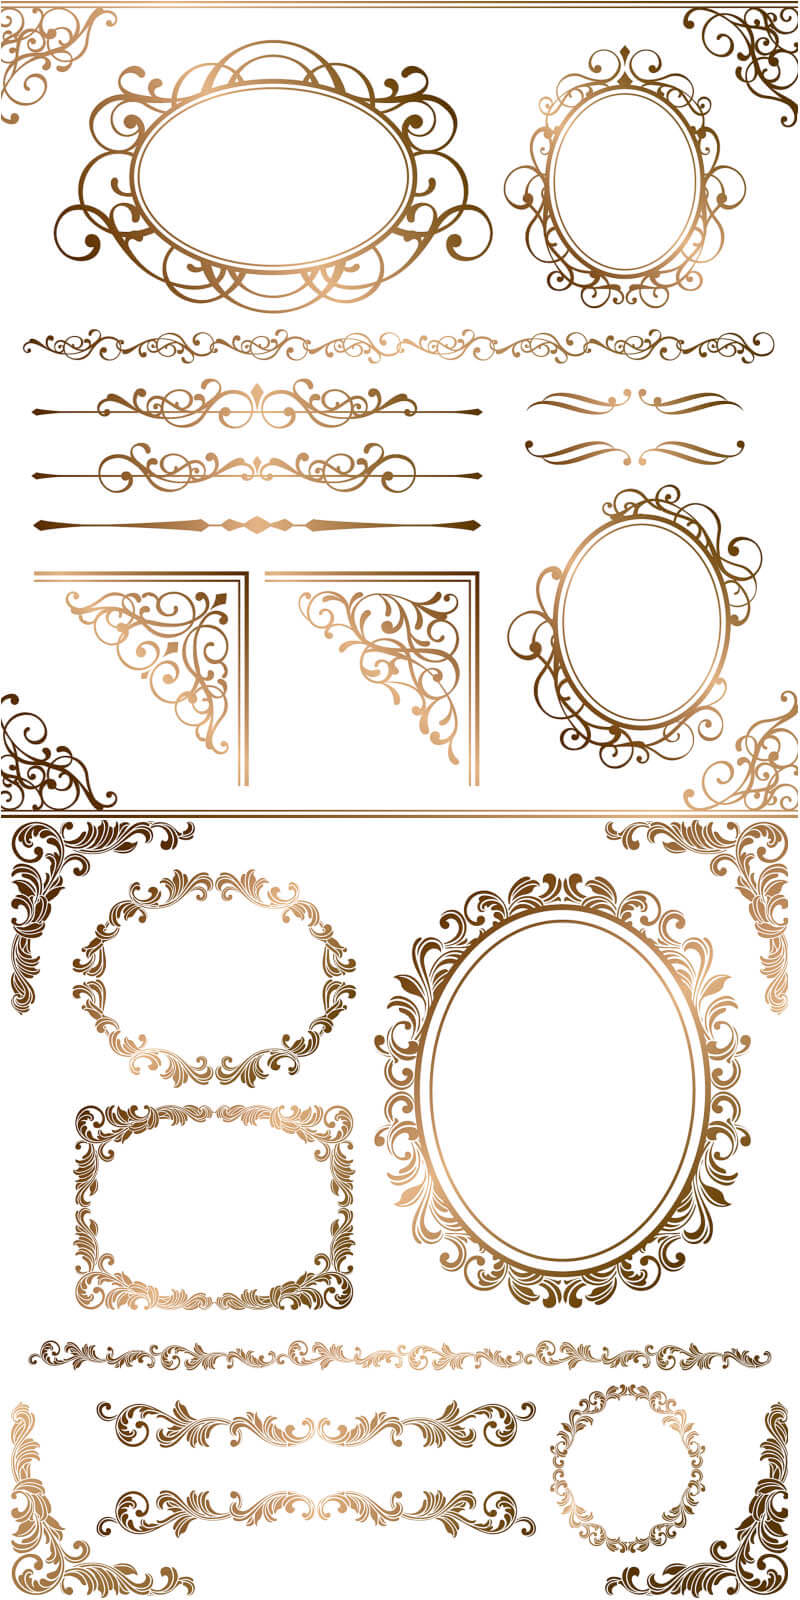 Gold ornamental elements and frames vector